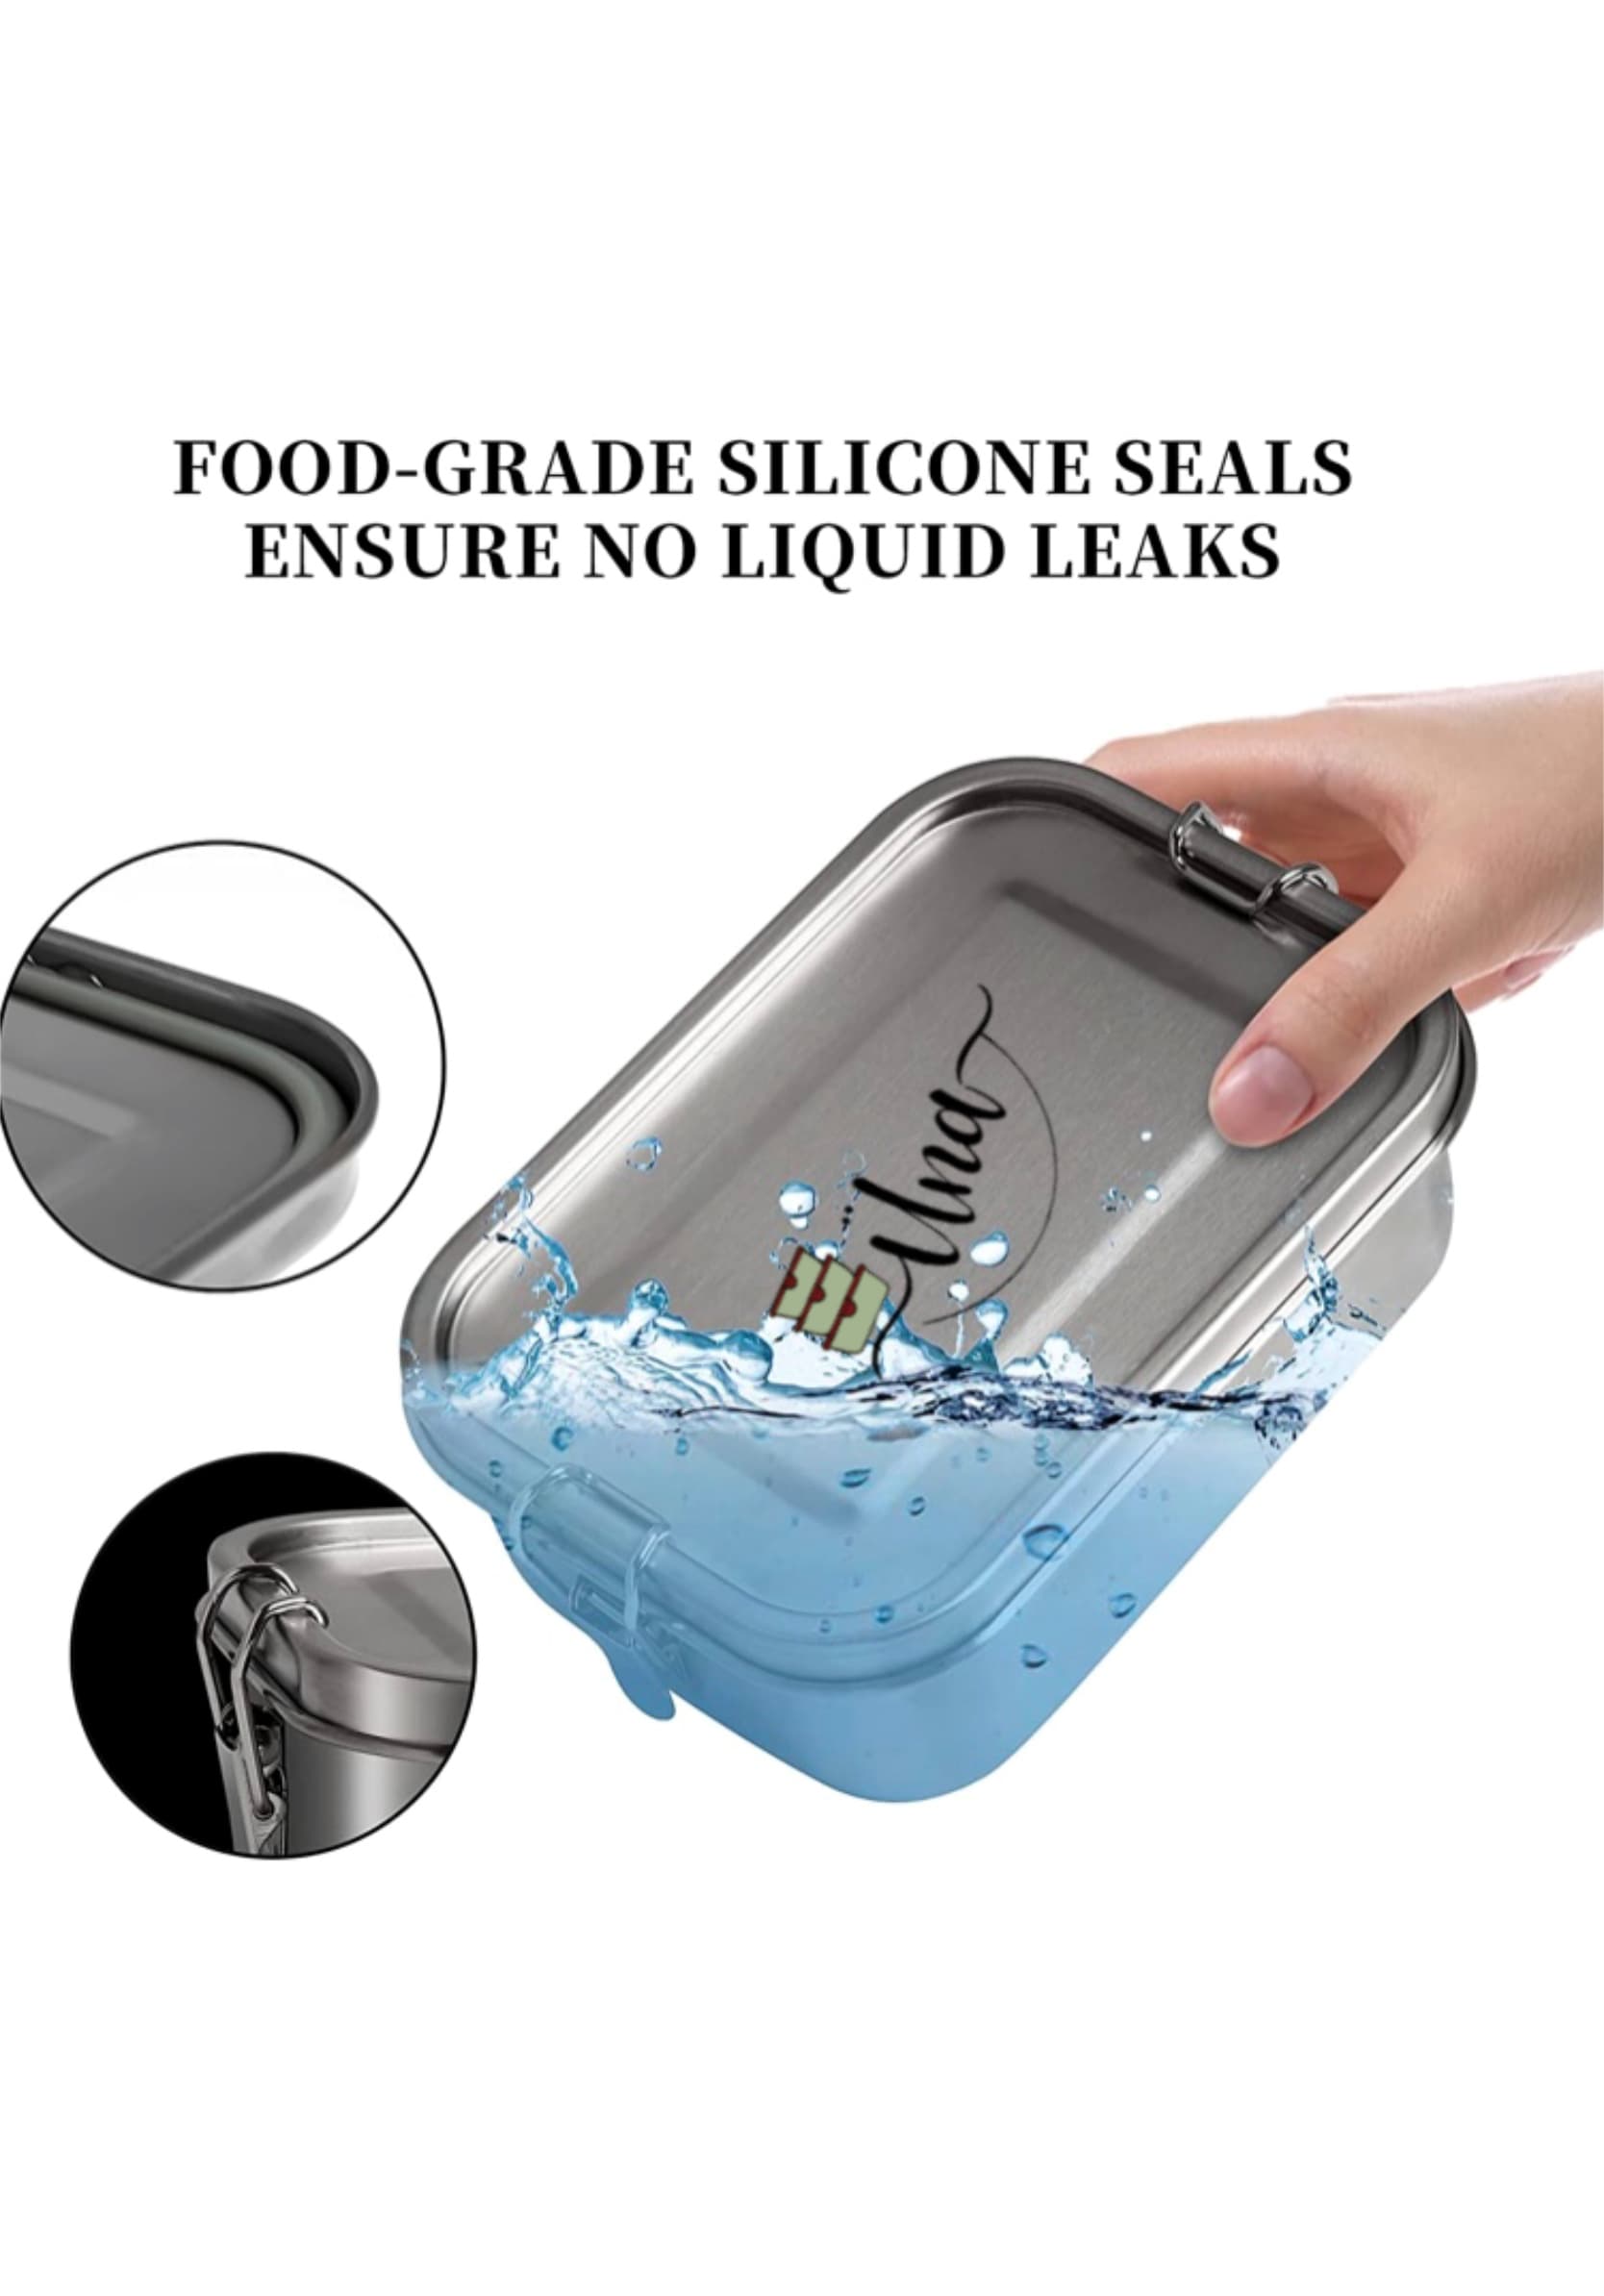 Saizhuo to-go box sealing foil (aluminum) lunch box disposable lunch b –  CokMaster